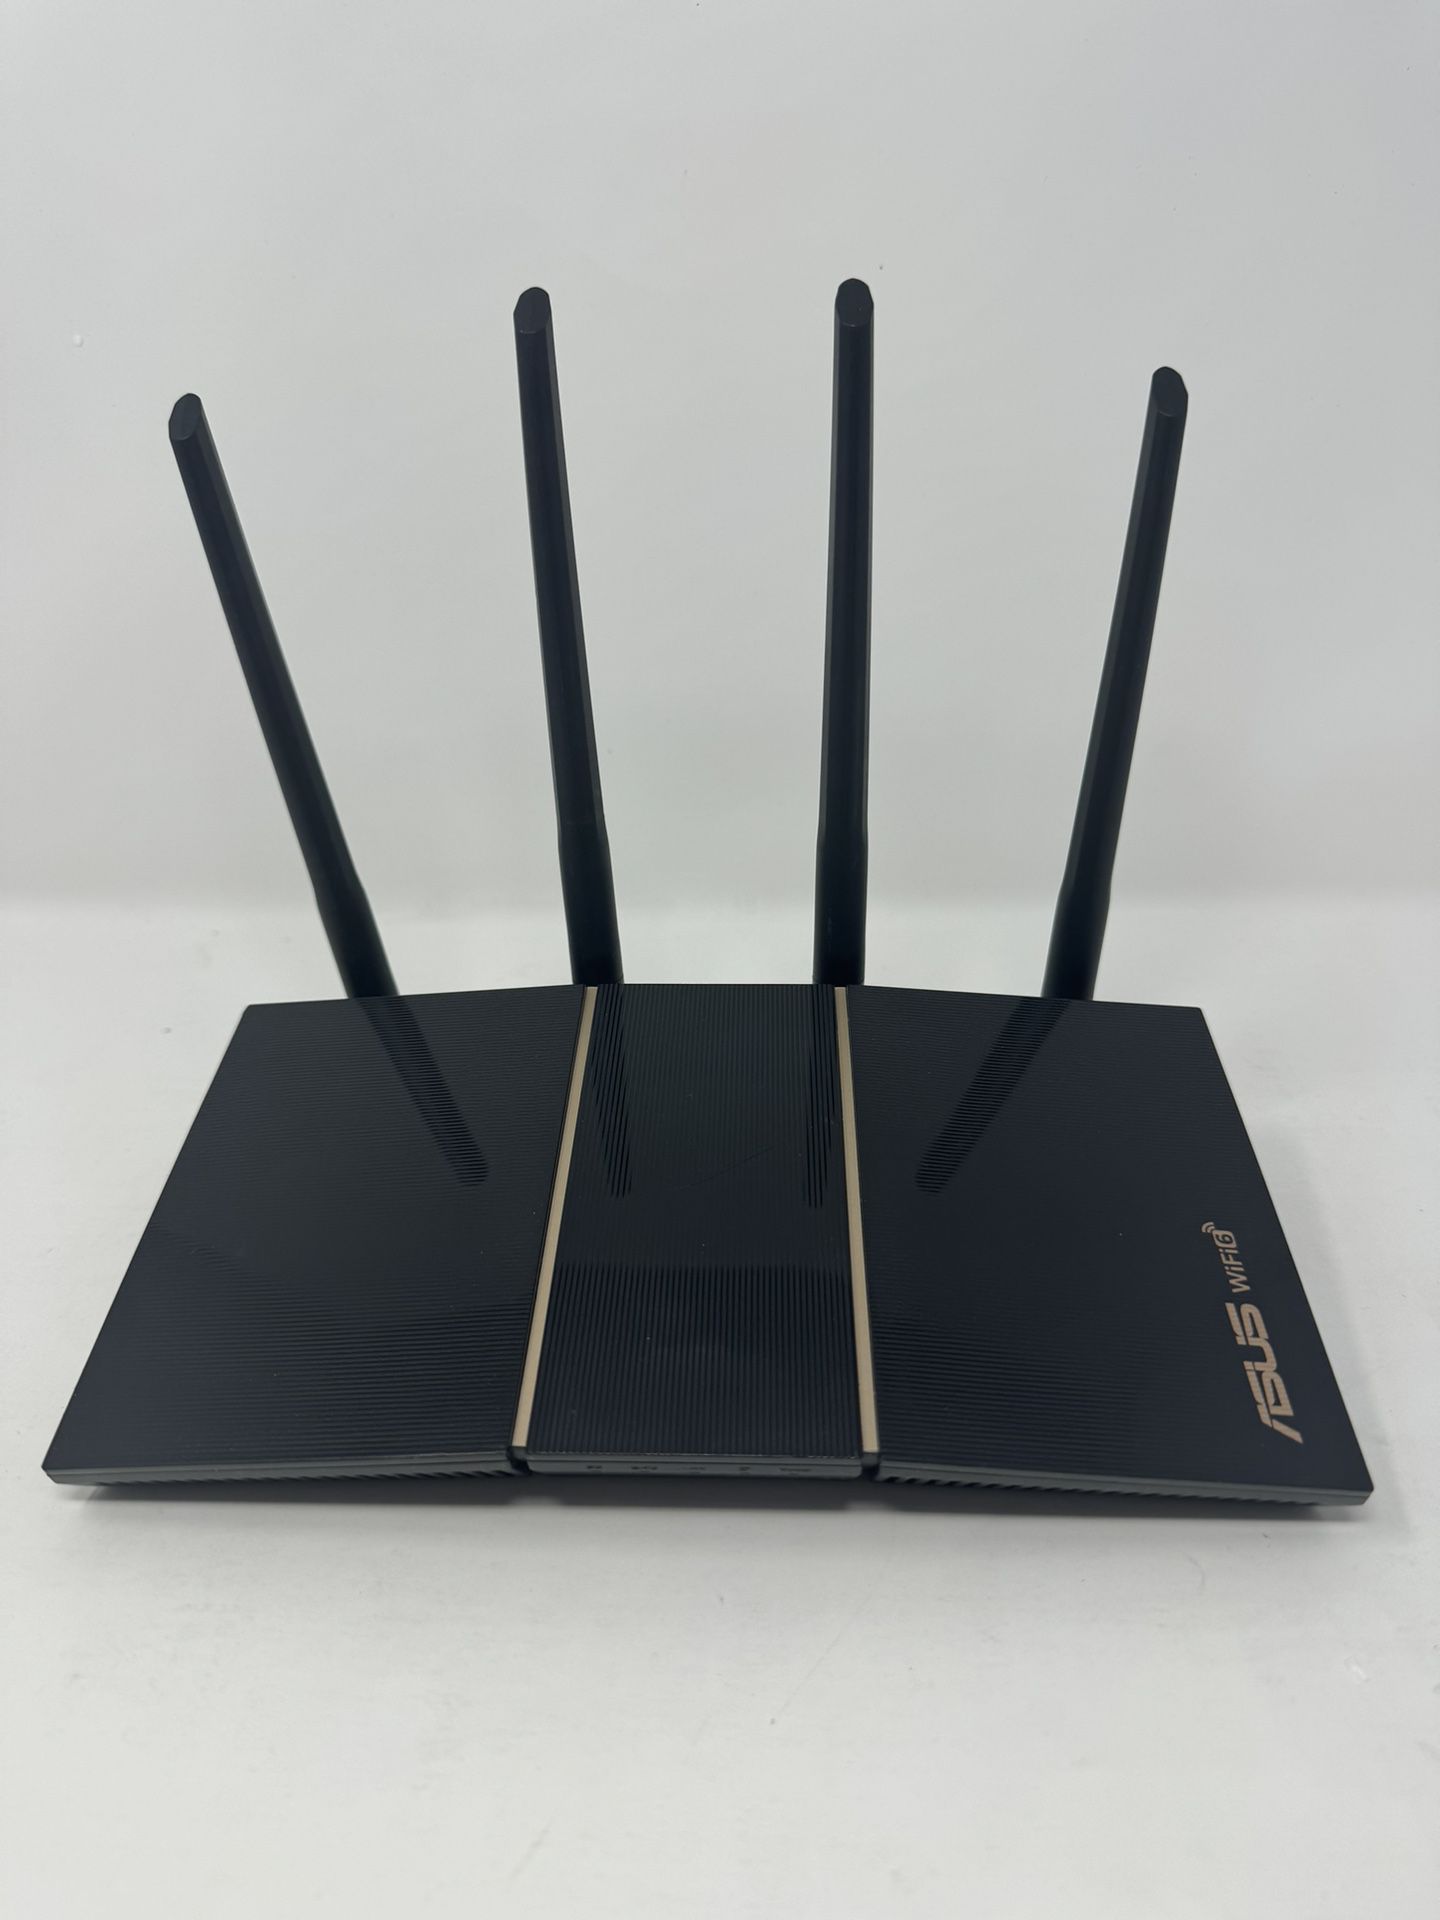 Asus Wifi 6 Router